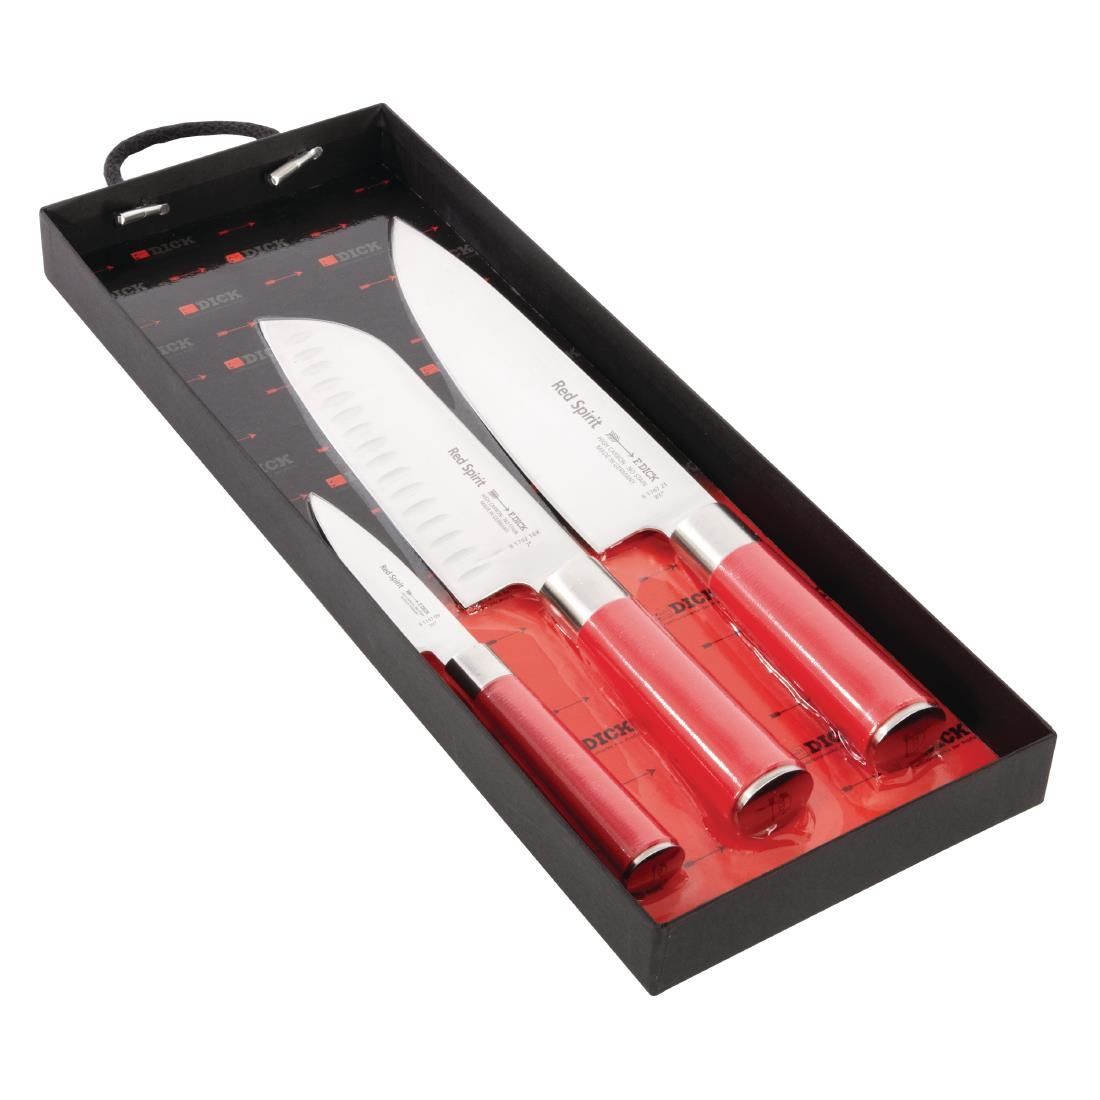 Dick Red Spirit 3 Piece Gift Set - GH331 JD Catering Equipment Solutions Ltd